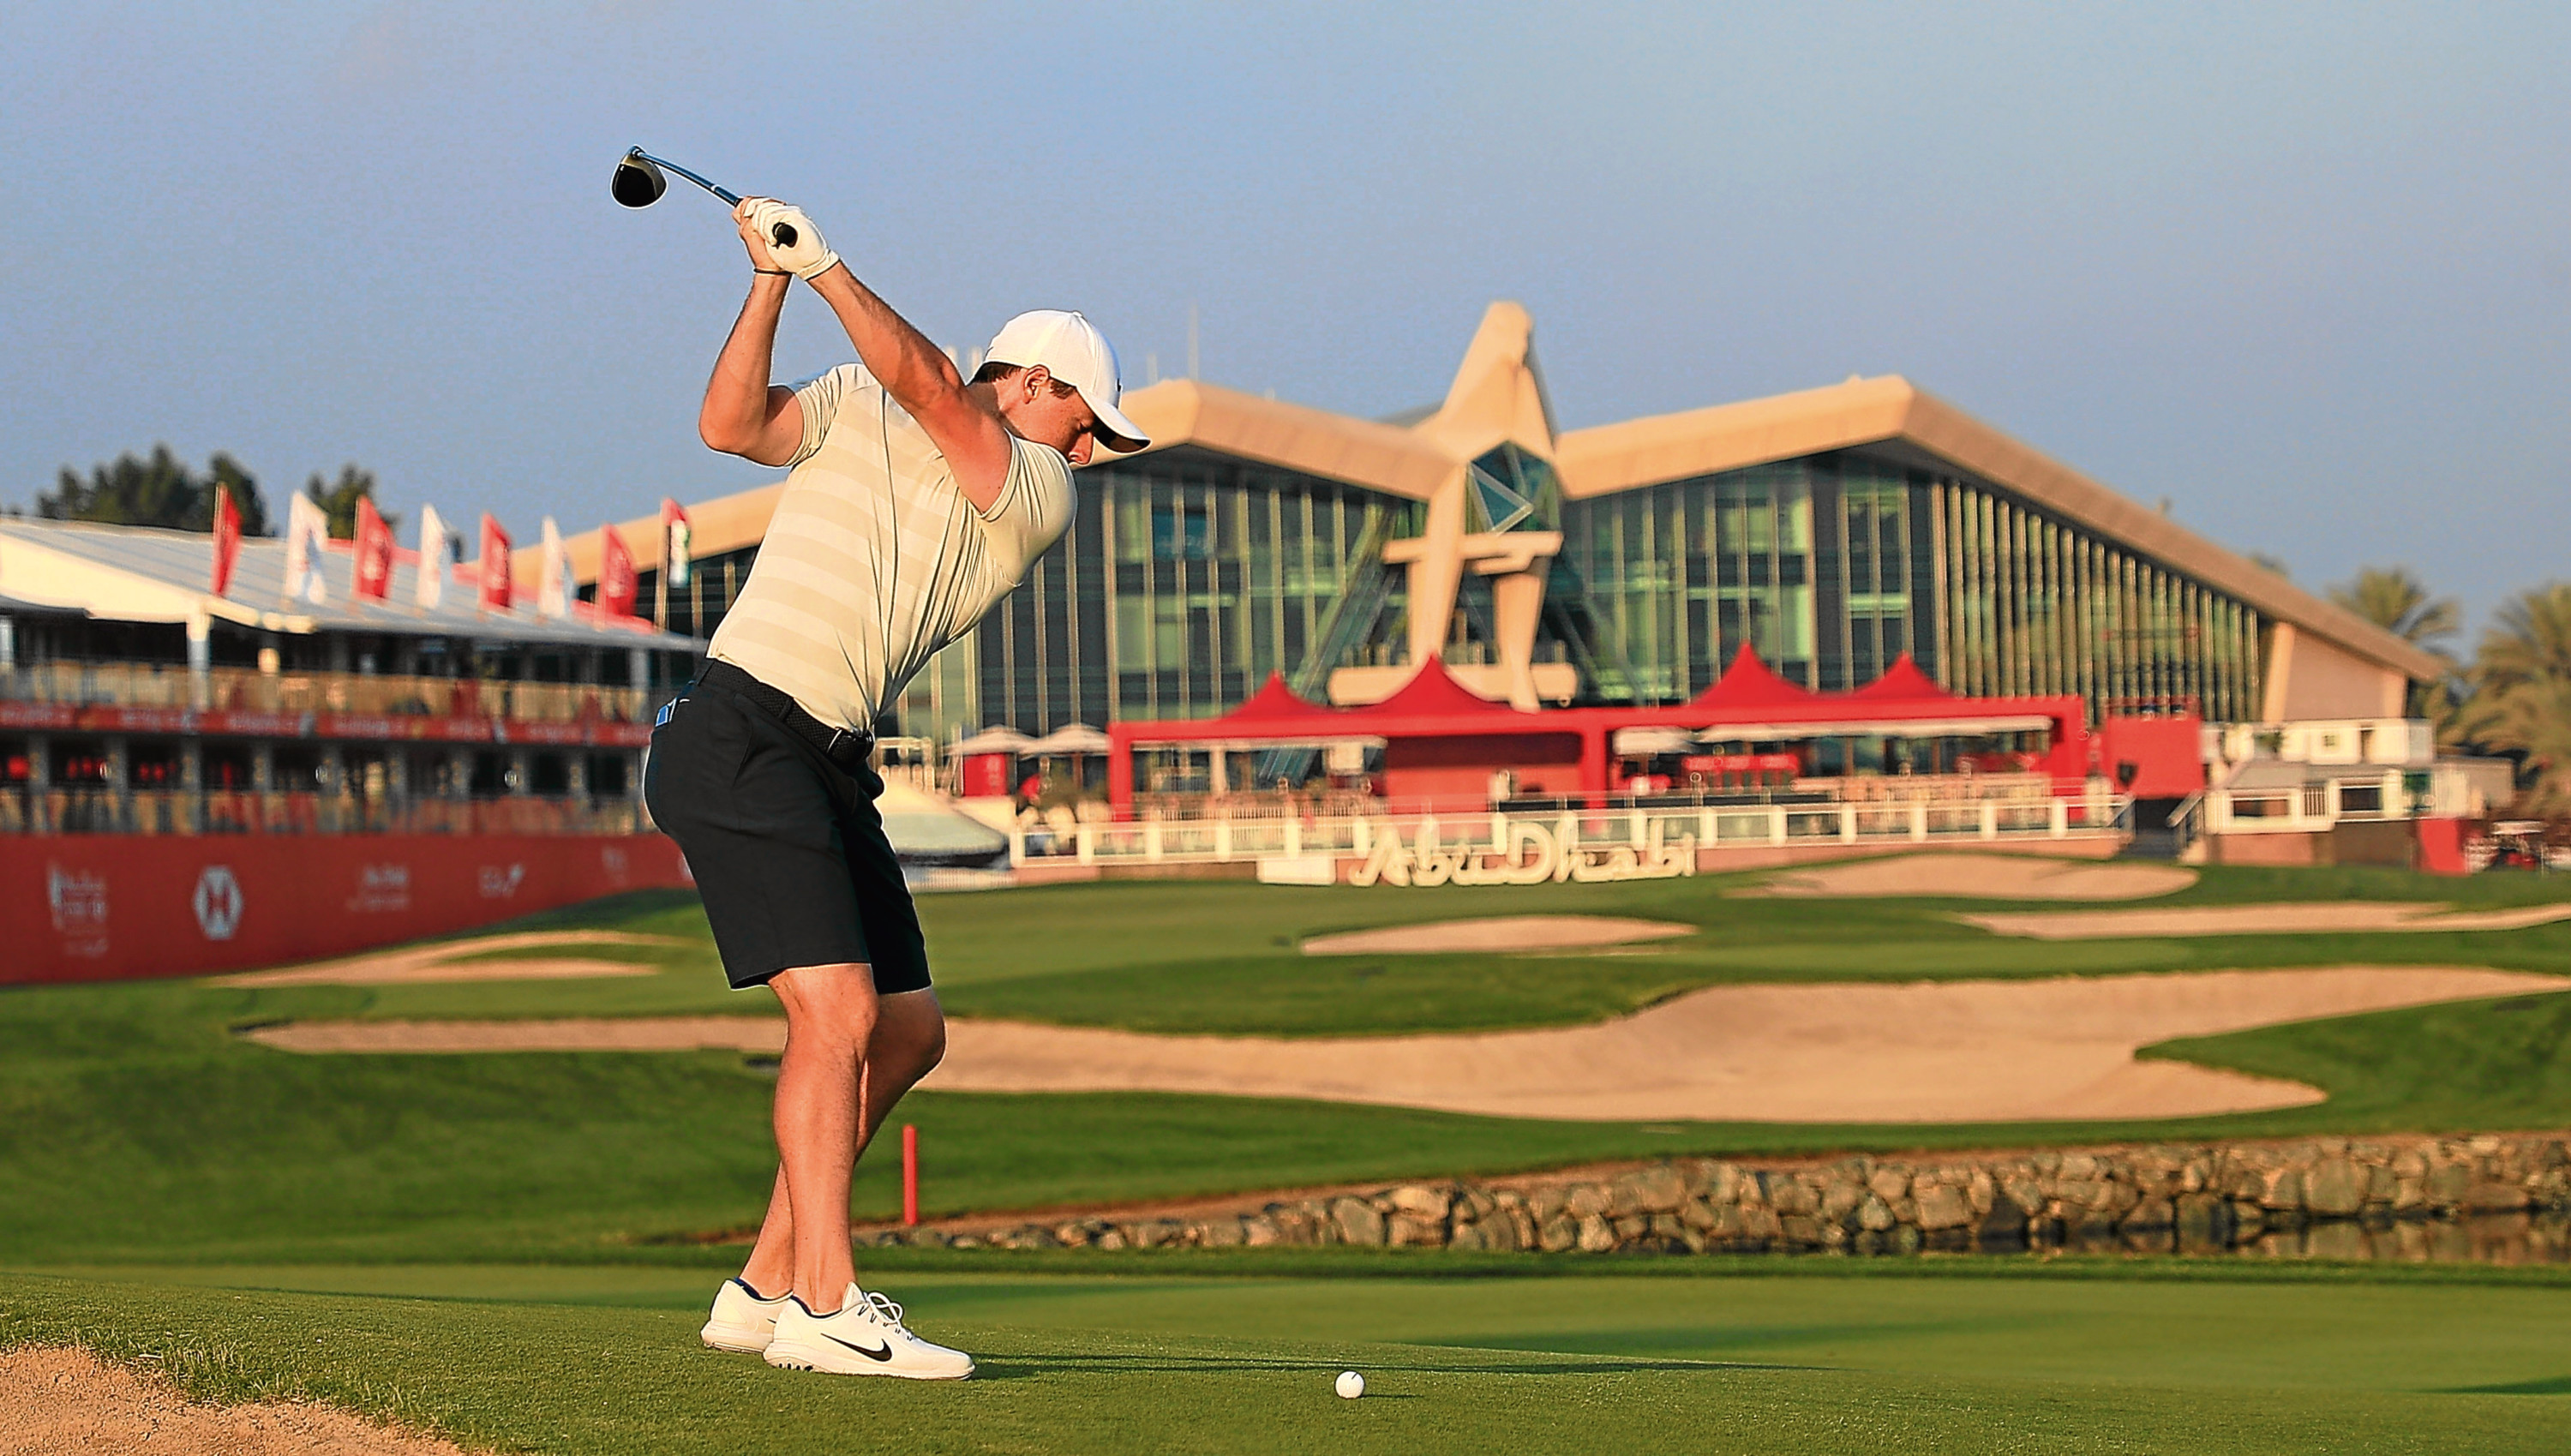 Rory McIlroy will make his season debut at Abu Dhai this week, where's he's spent much of the winter rehabbing.